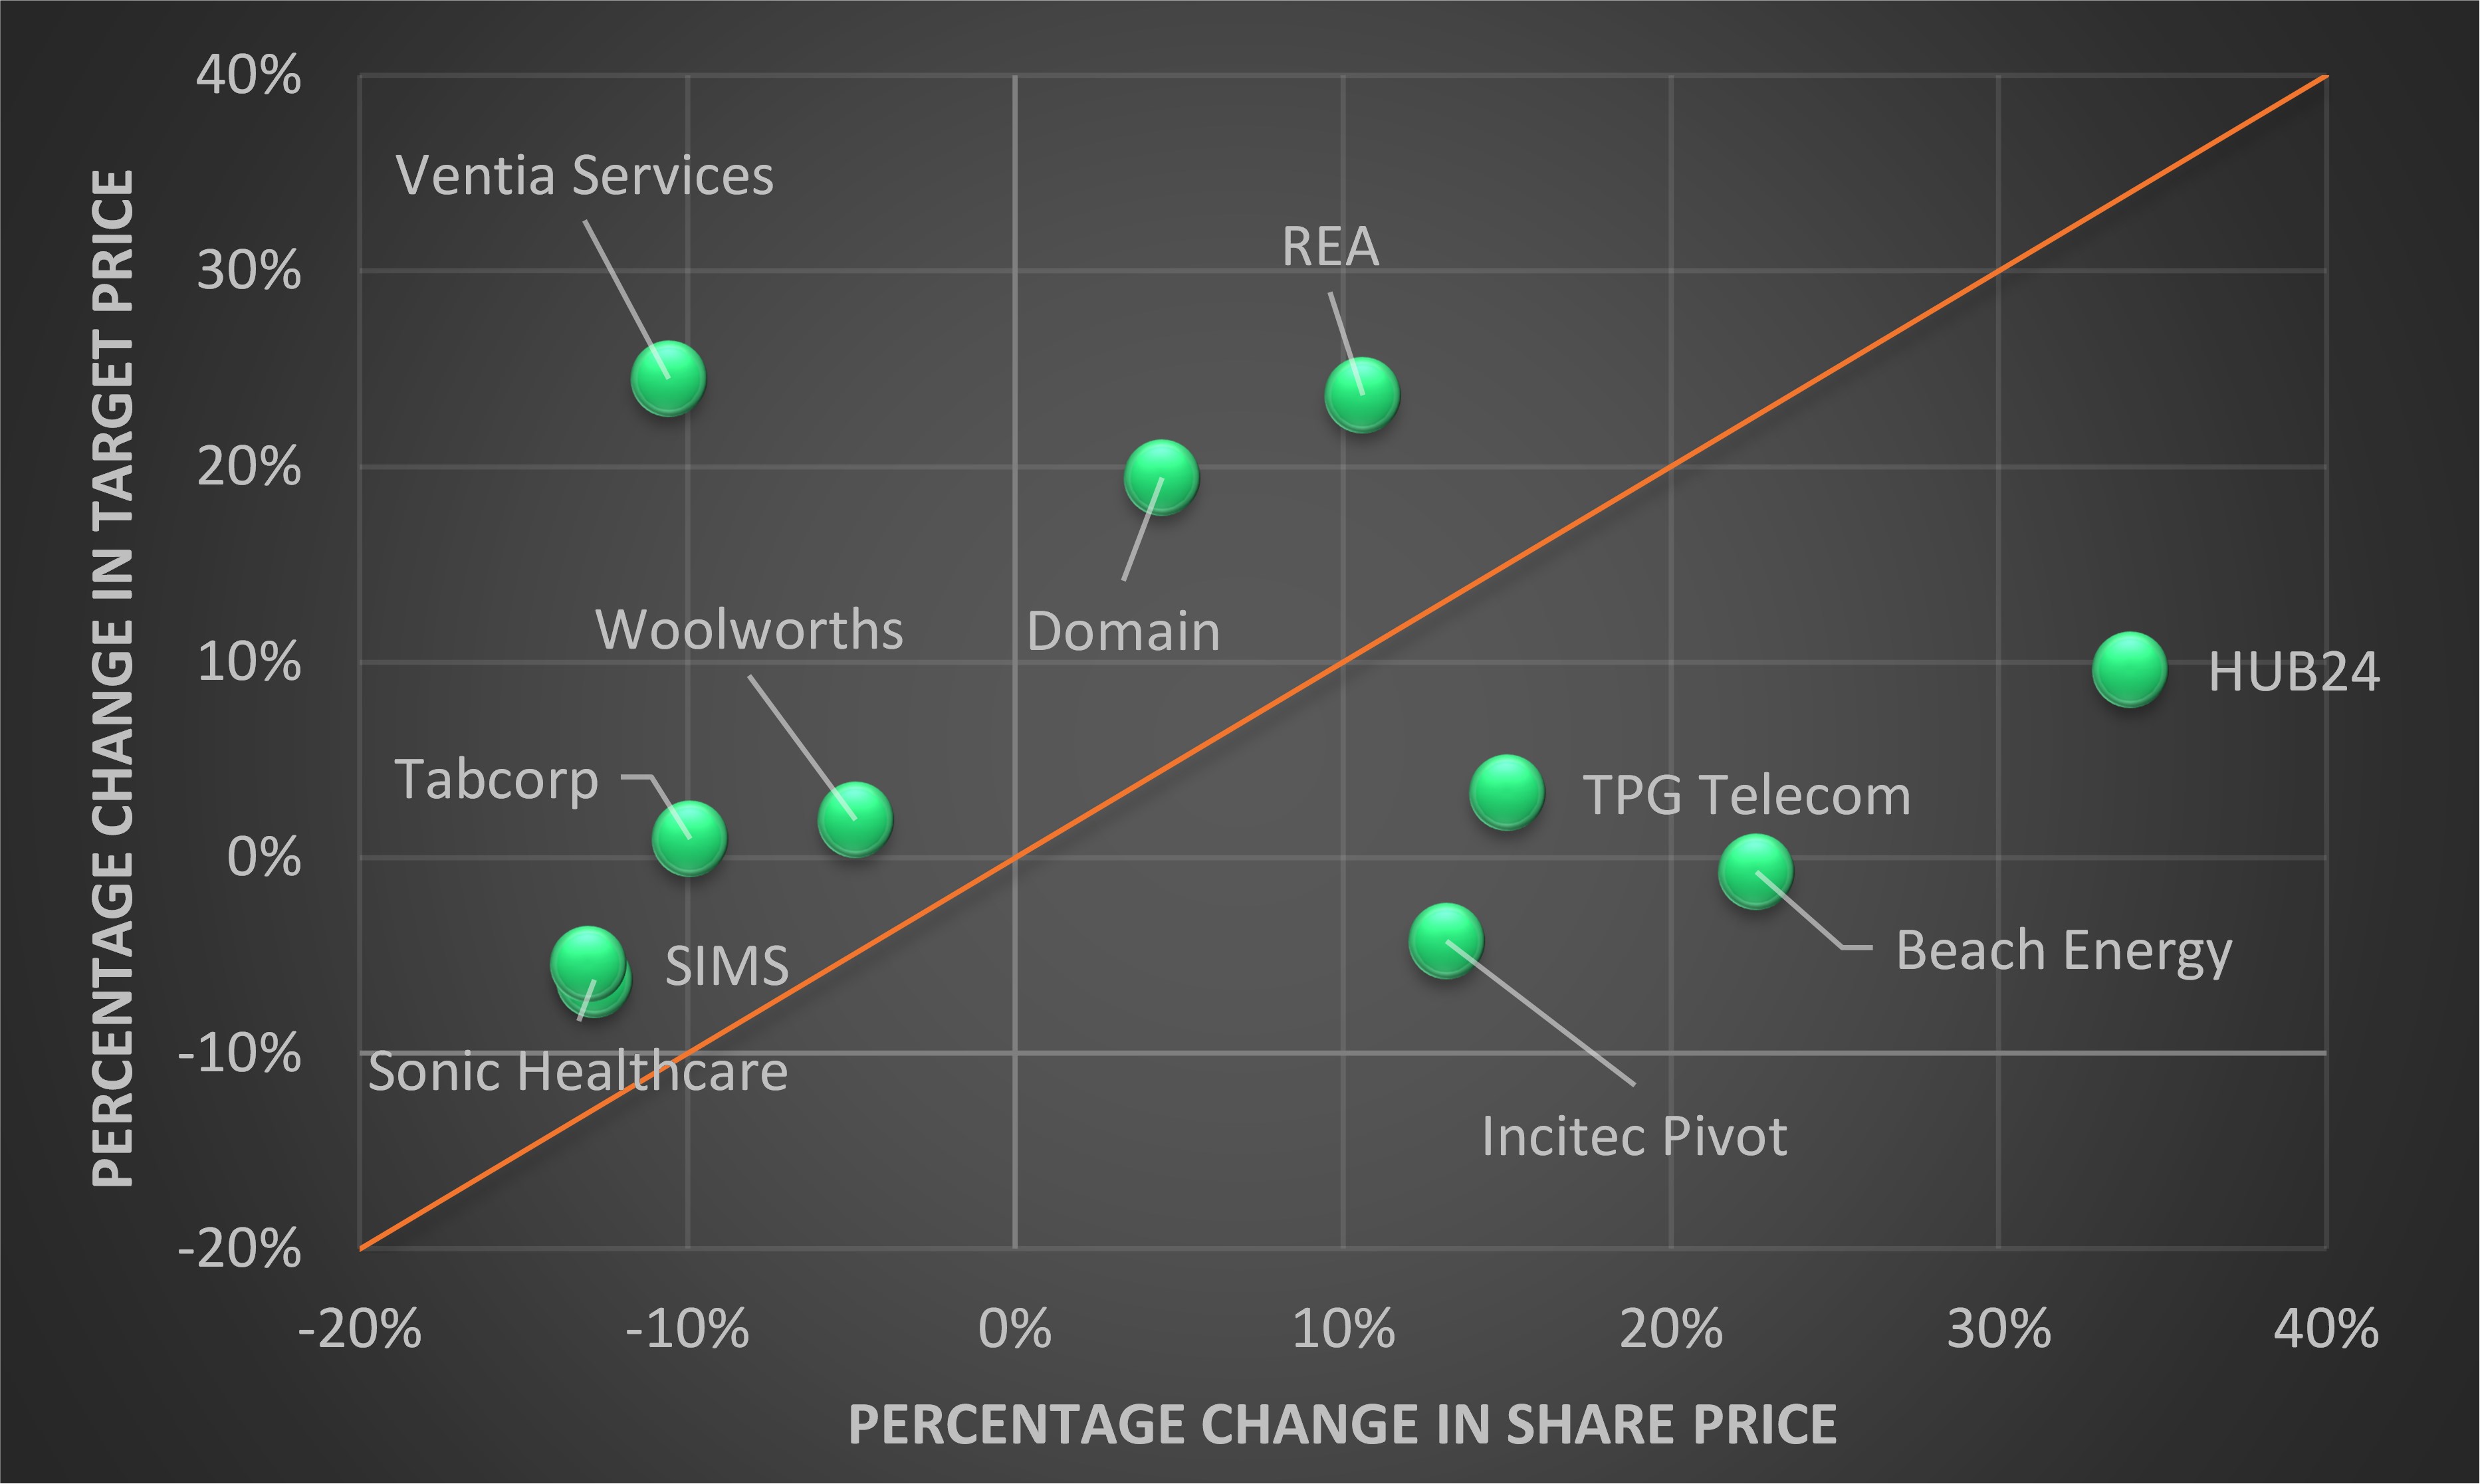 Figure 2. Share price change and target price change for selected stocks